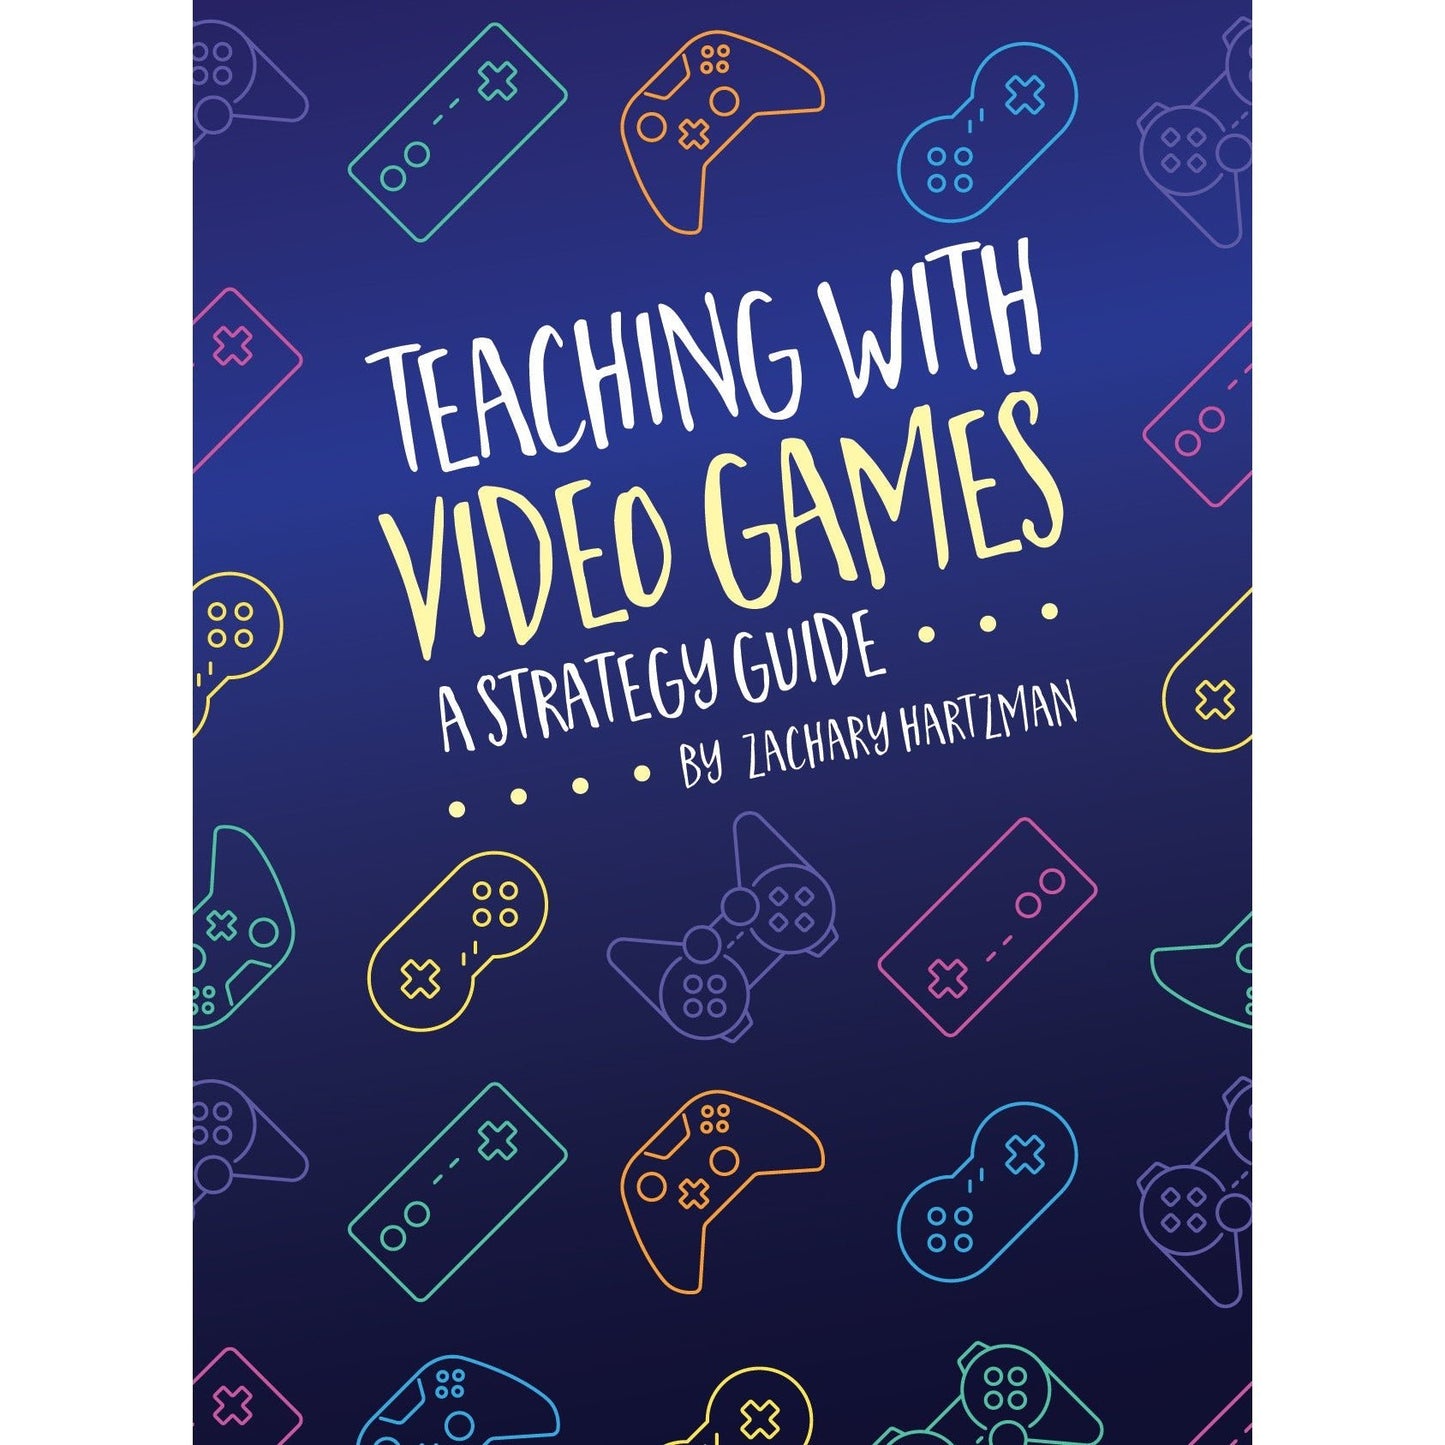 Teaching With Video Games: A Strategy Guide - Digital Download (Epub) - Geek Therapeutics